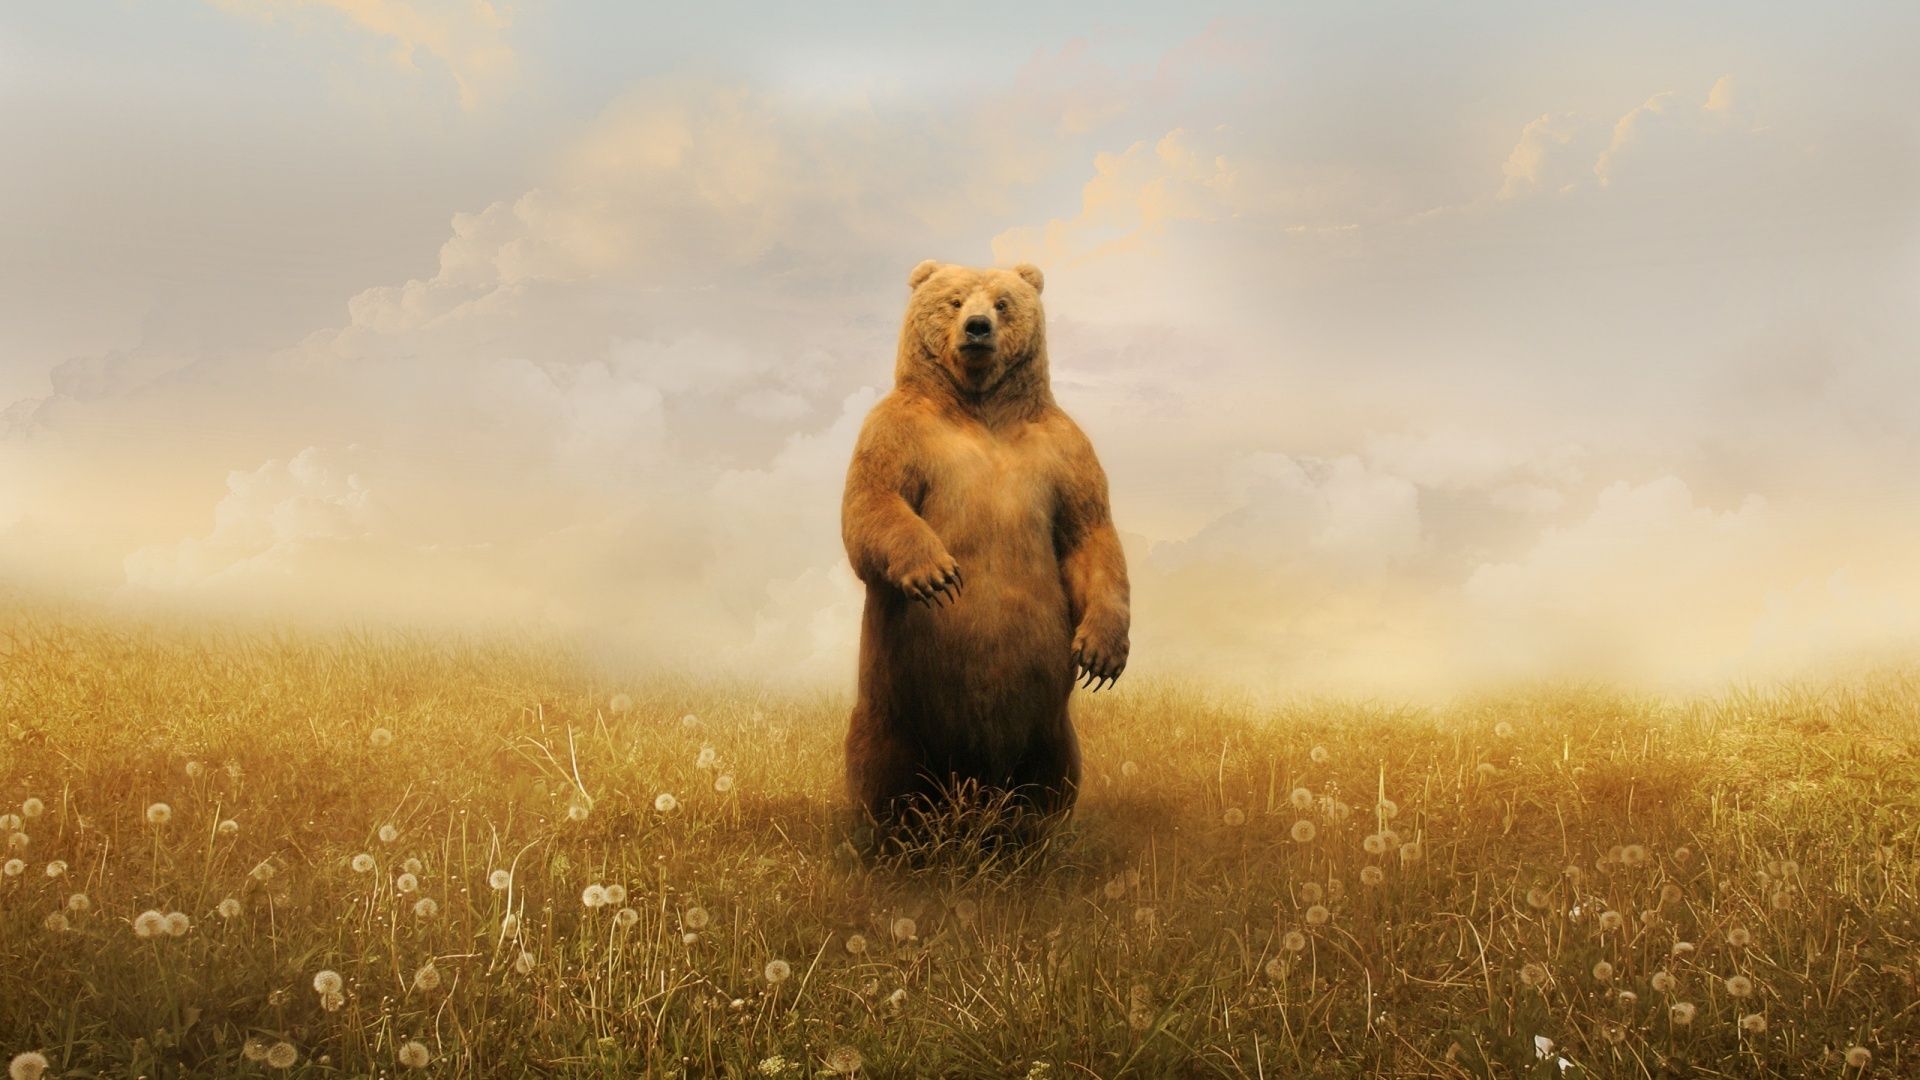 Bear Wallpapers HD Pictures | One HD Wallpaper Pictures ...